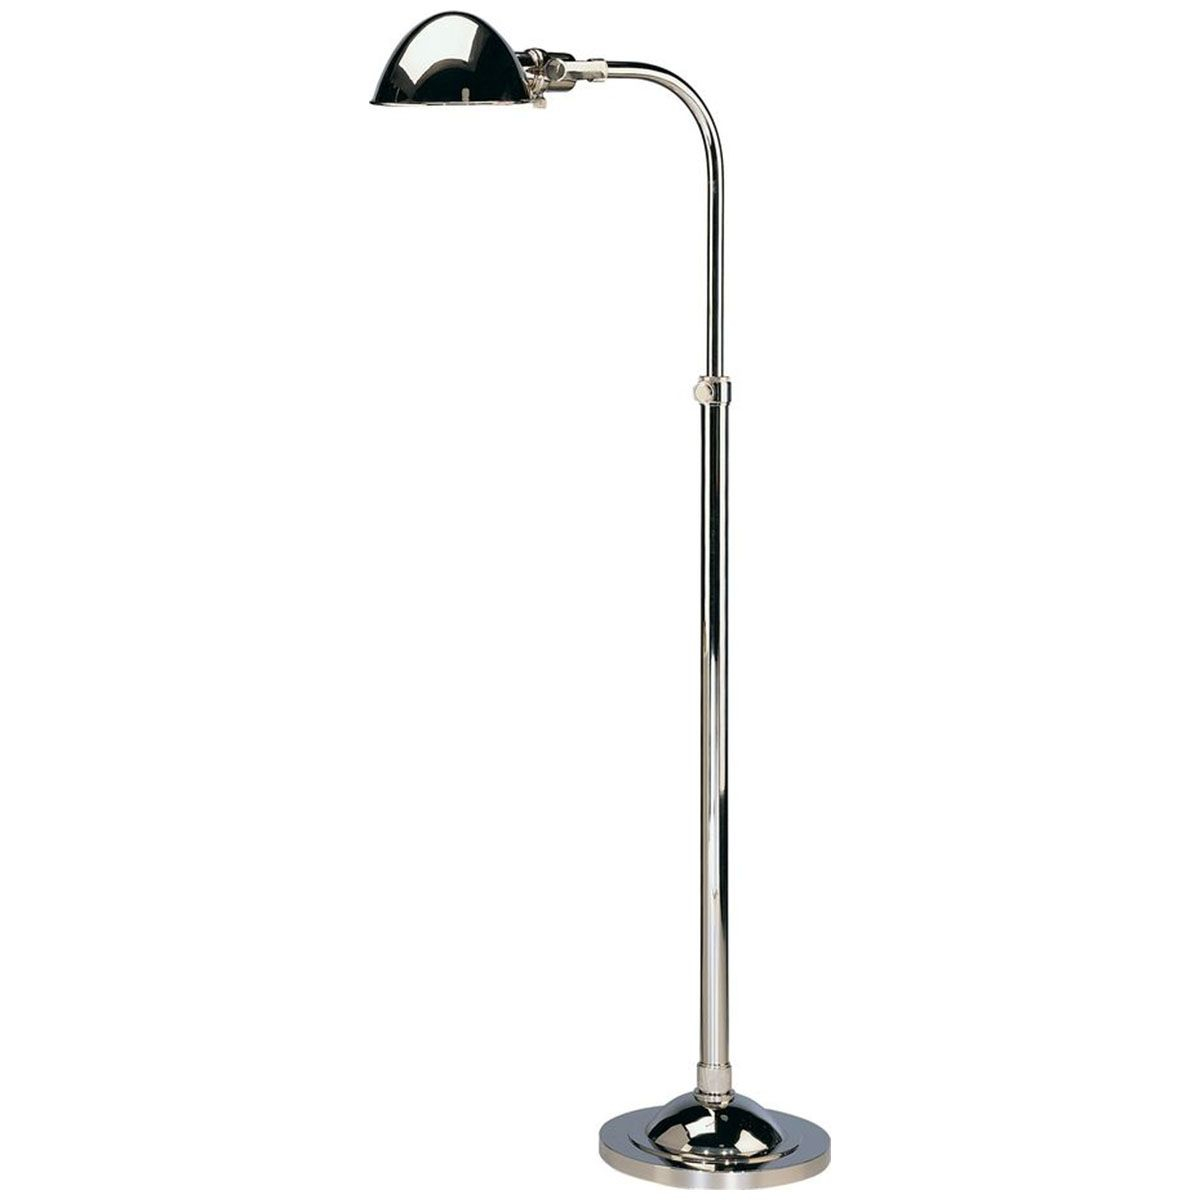 Robert Abbey Alvin Polished Nickel Pharmacy Floor Lamp S1905 throughout size 1200 X 1200